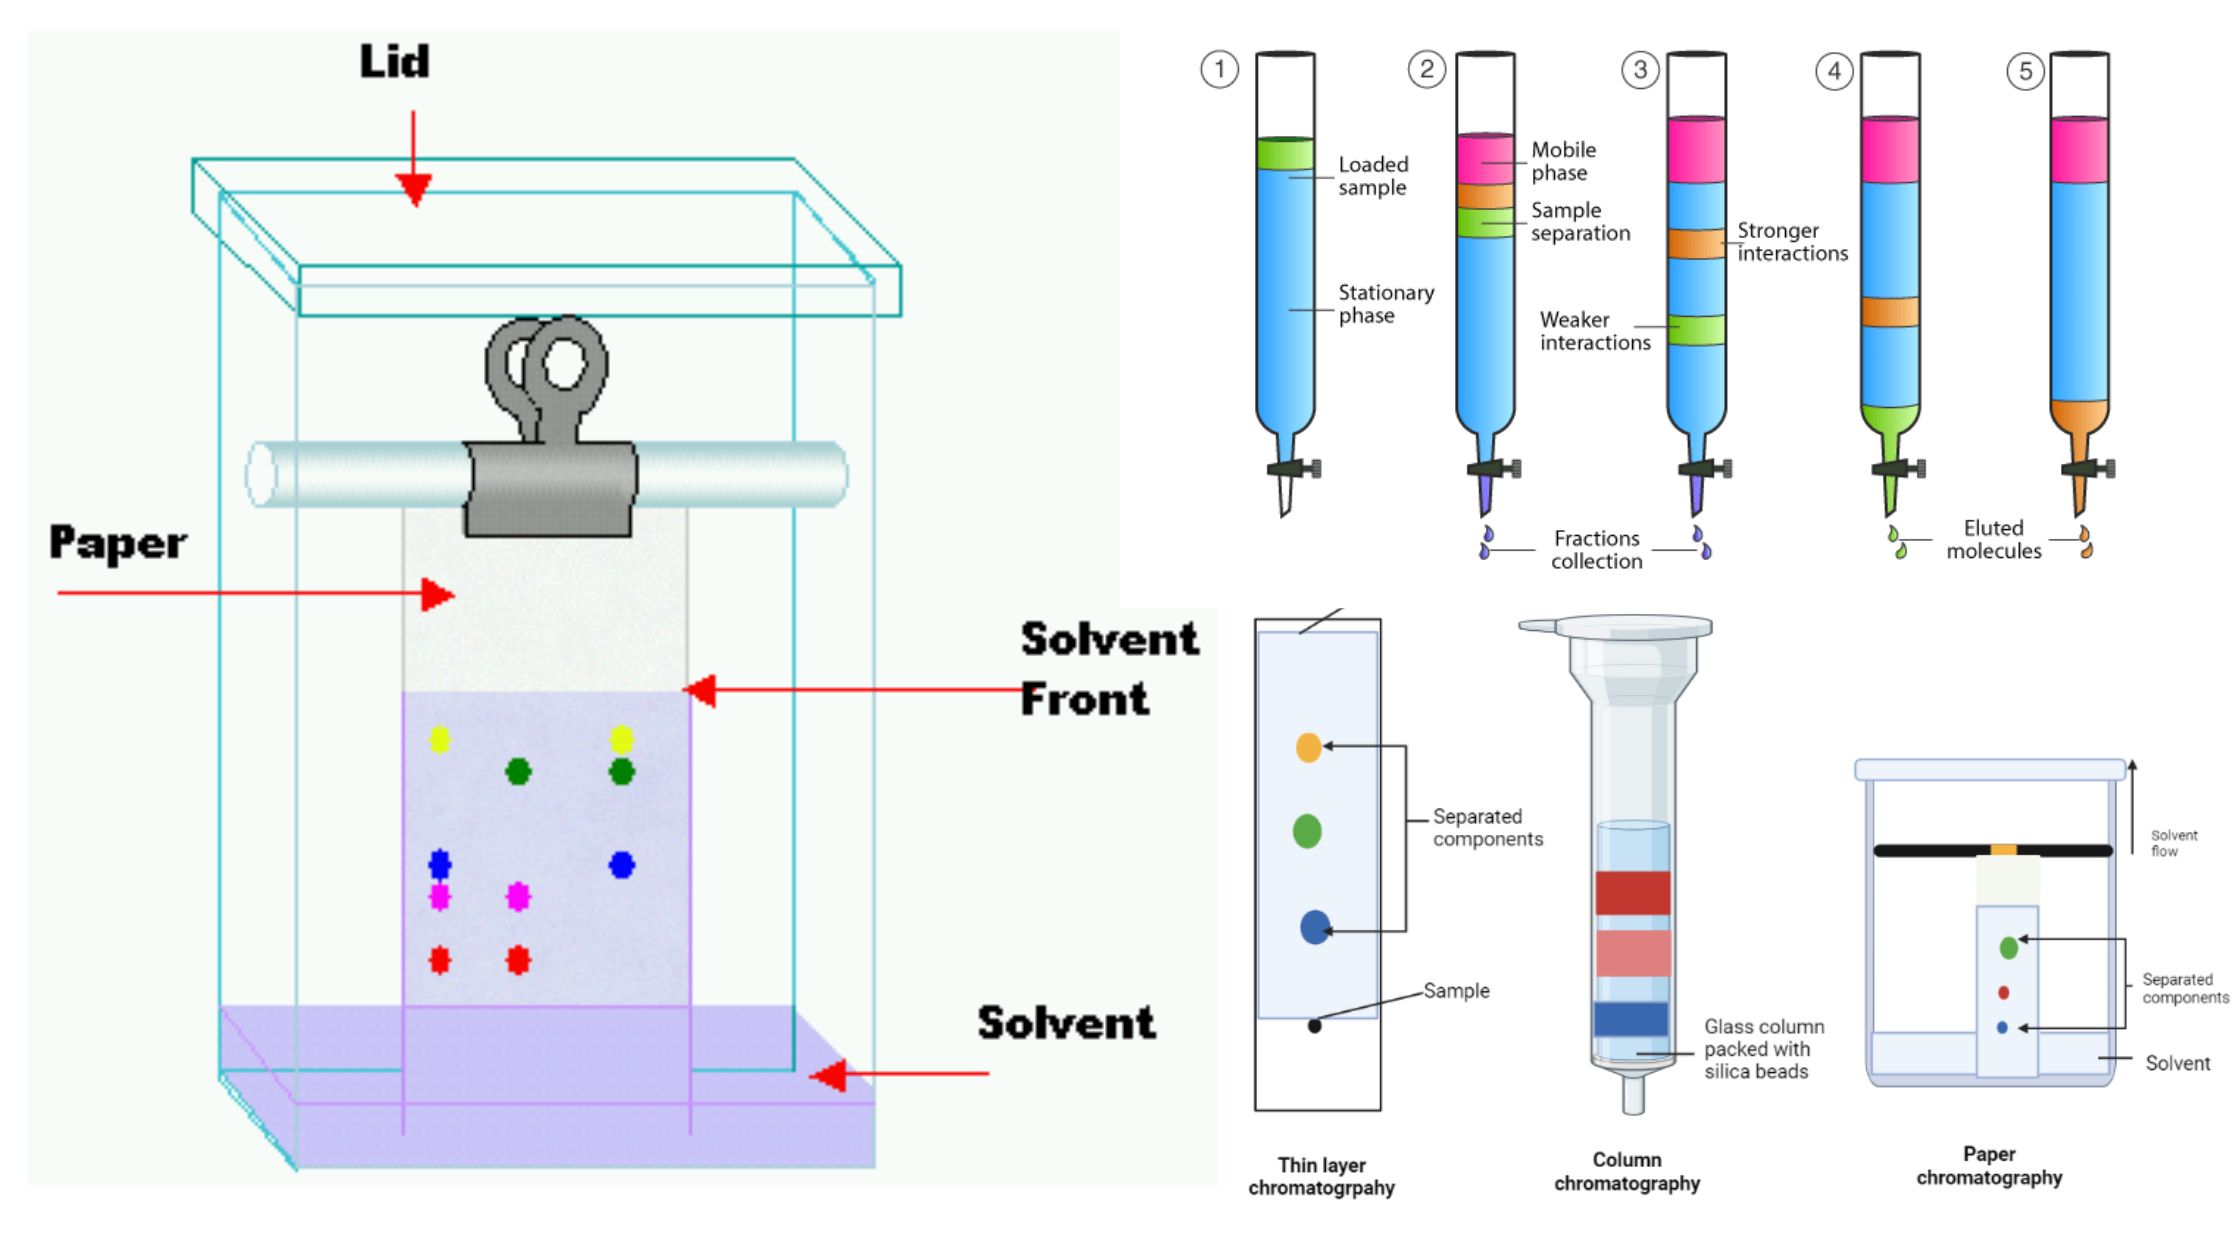 Types of Chromatography - Definition, Principle, Steps, Uses